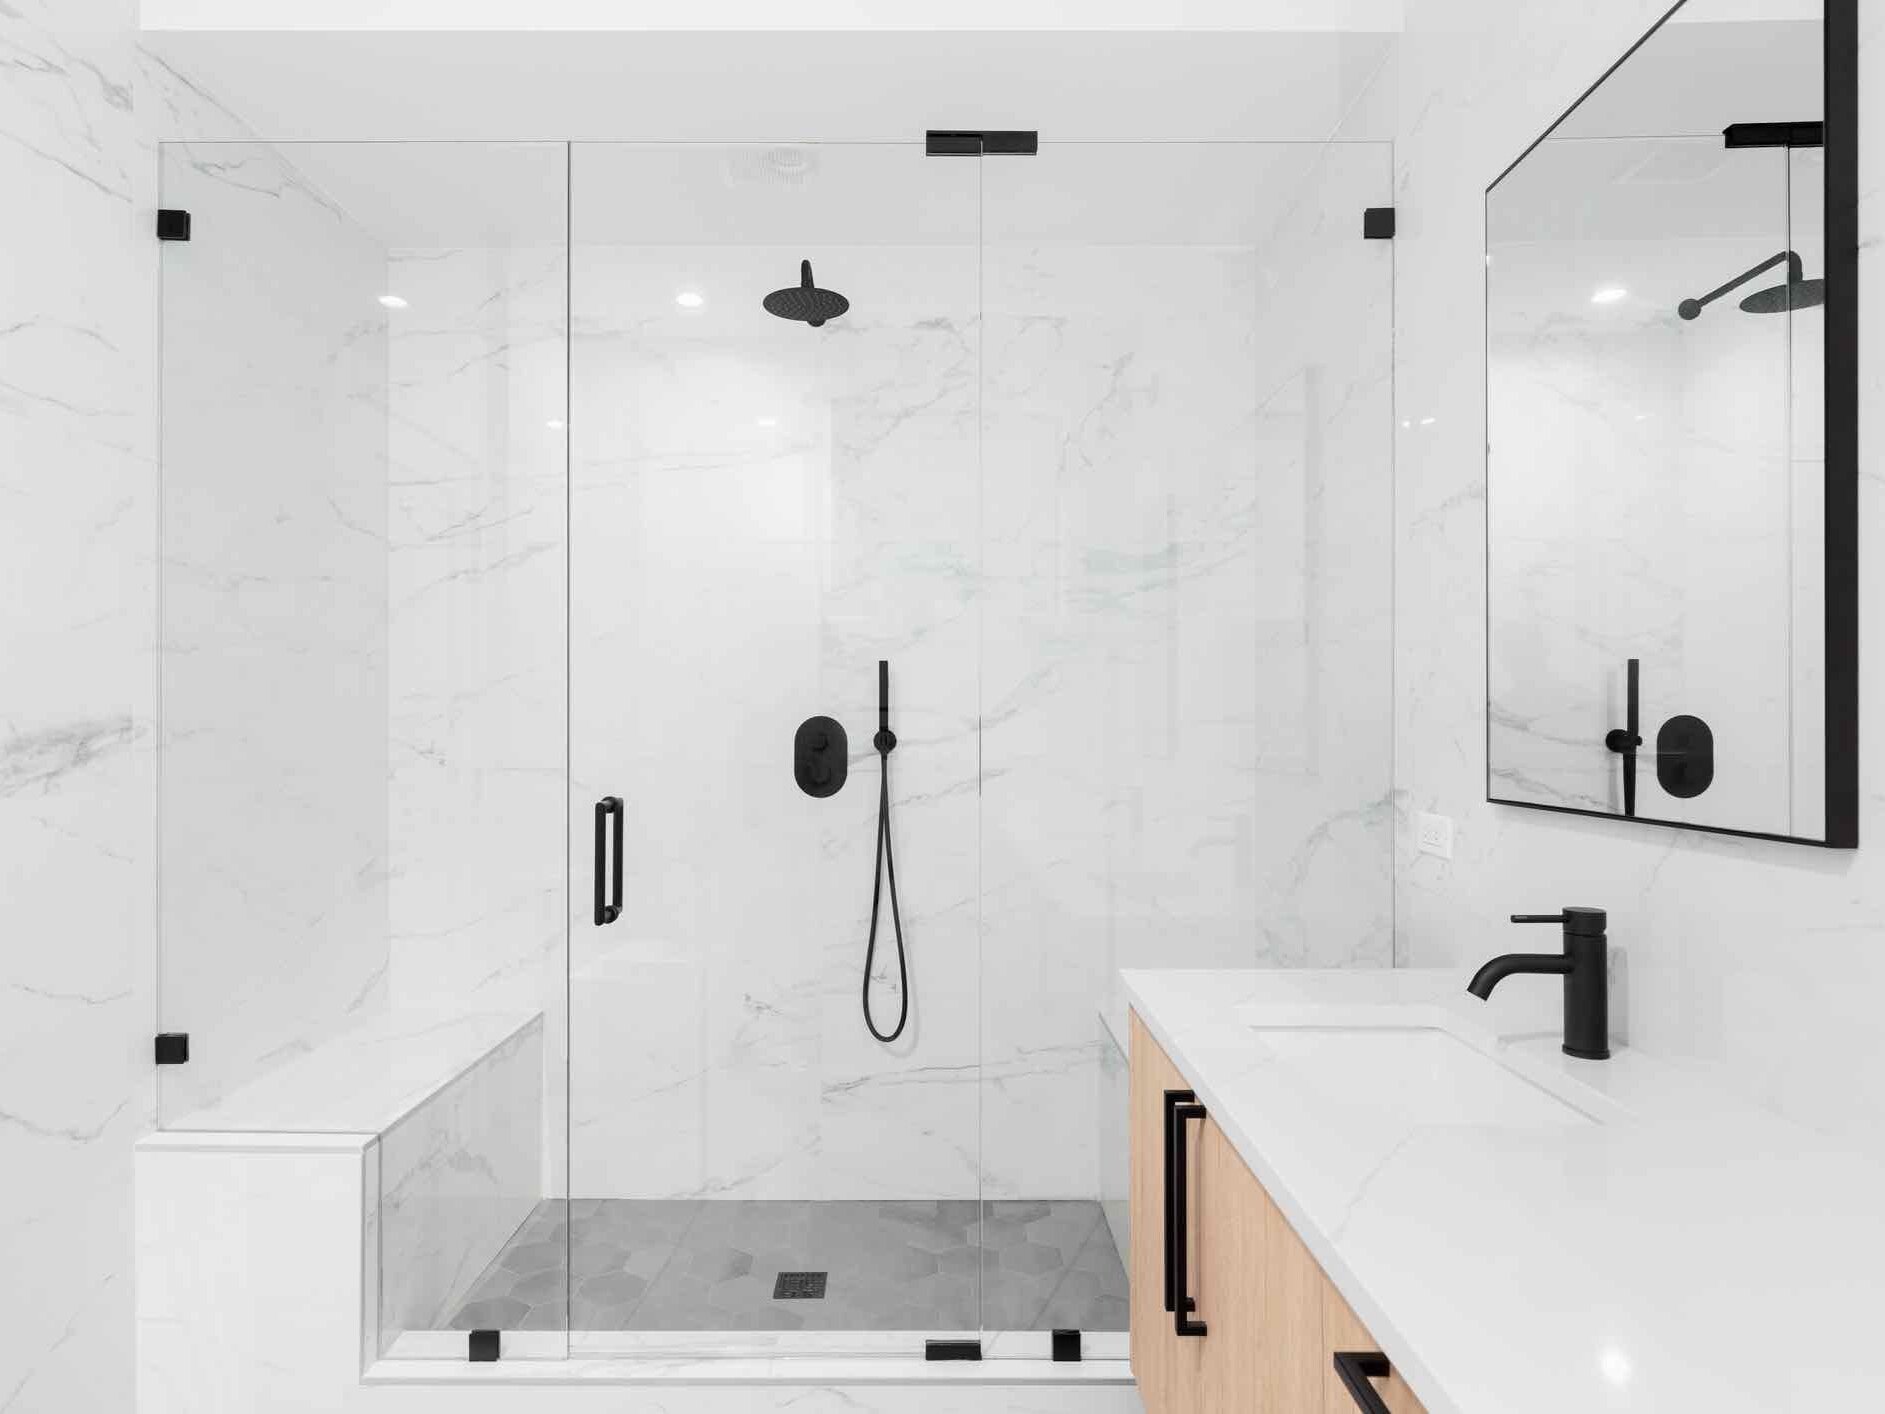 What Is a Walk-In Shower? Benefits and Styles